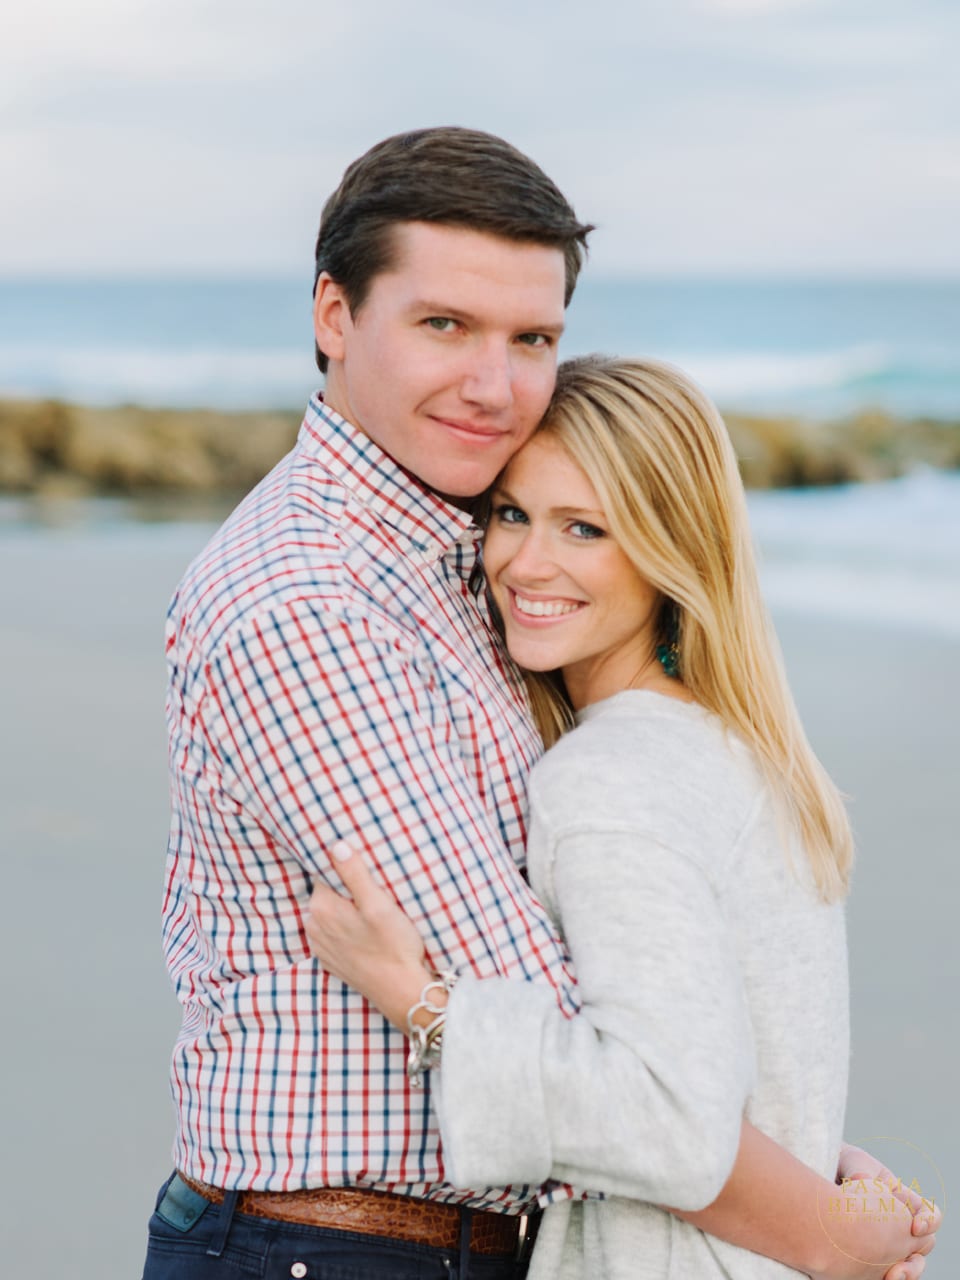 A Pawleys Island Engagement Session at Caledonia Golf & Fish Club by Pasha Belman Photographer